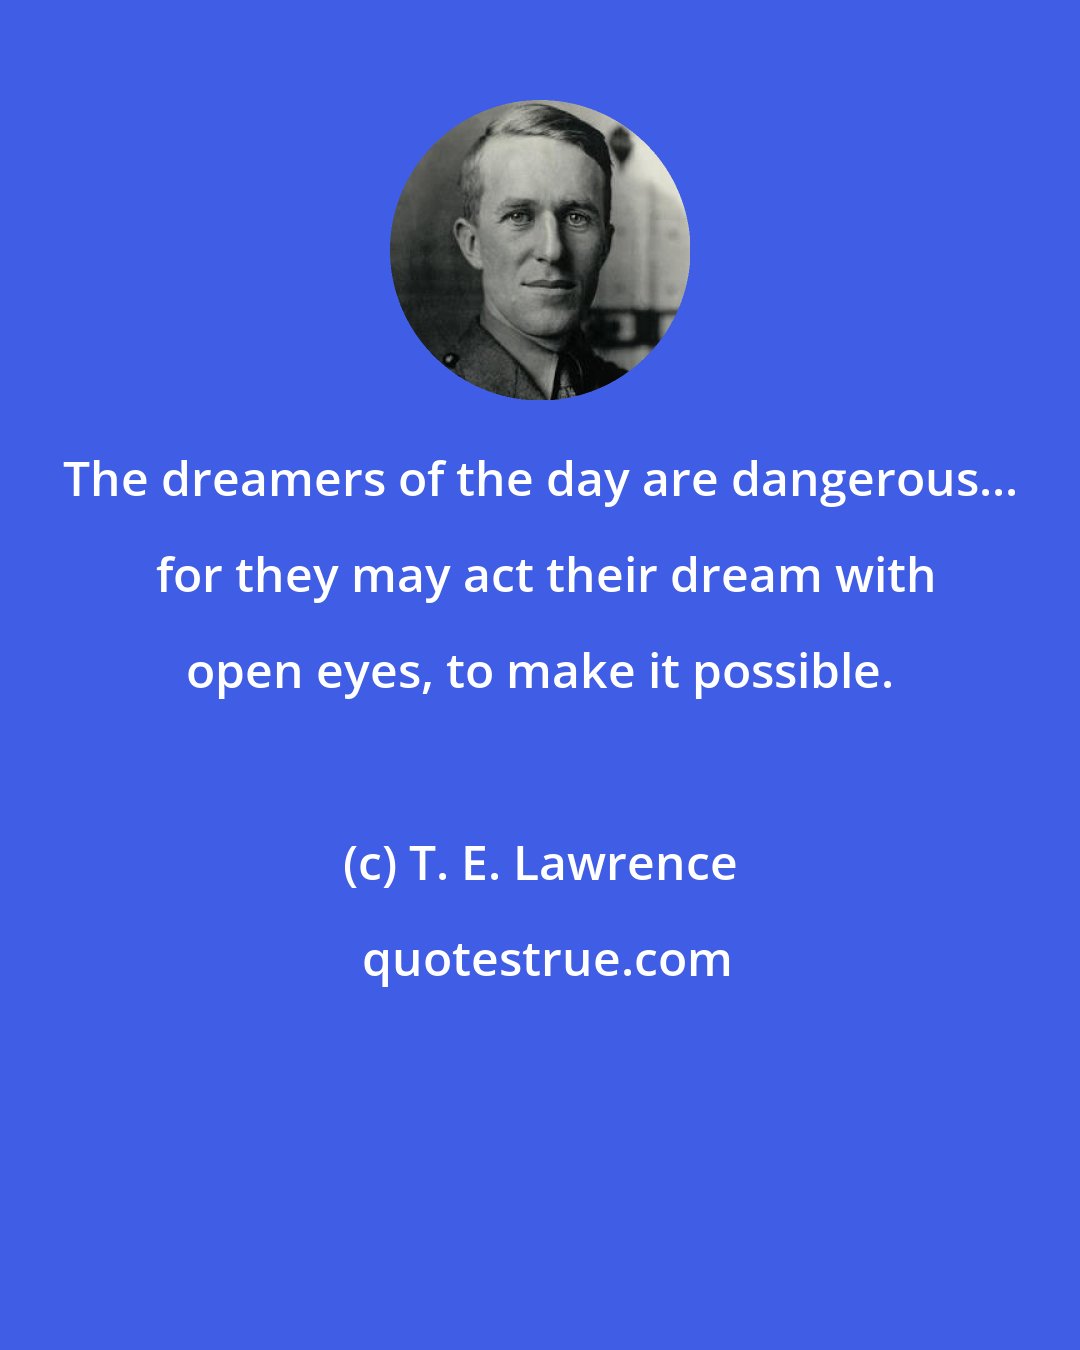 T. E. Lawrence: The dreamers of the day are dangerous...  for they may act their dream with open eyes, to make it possible.